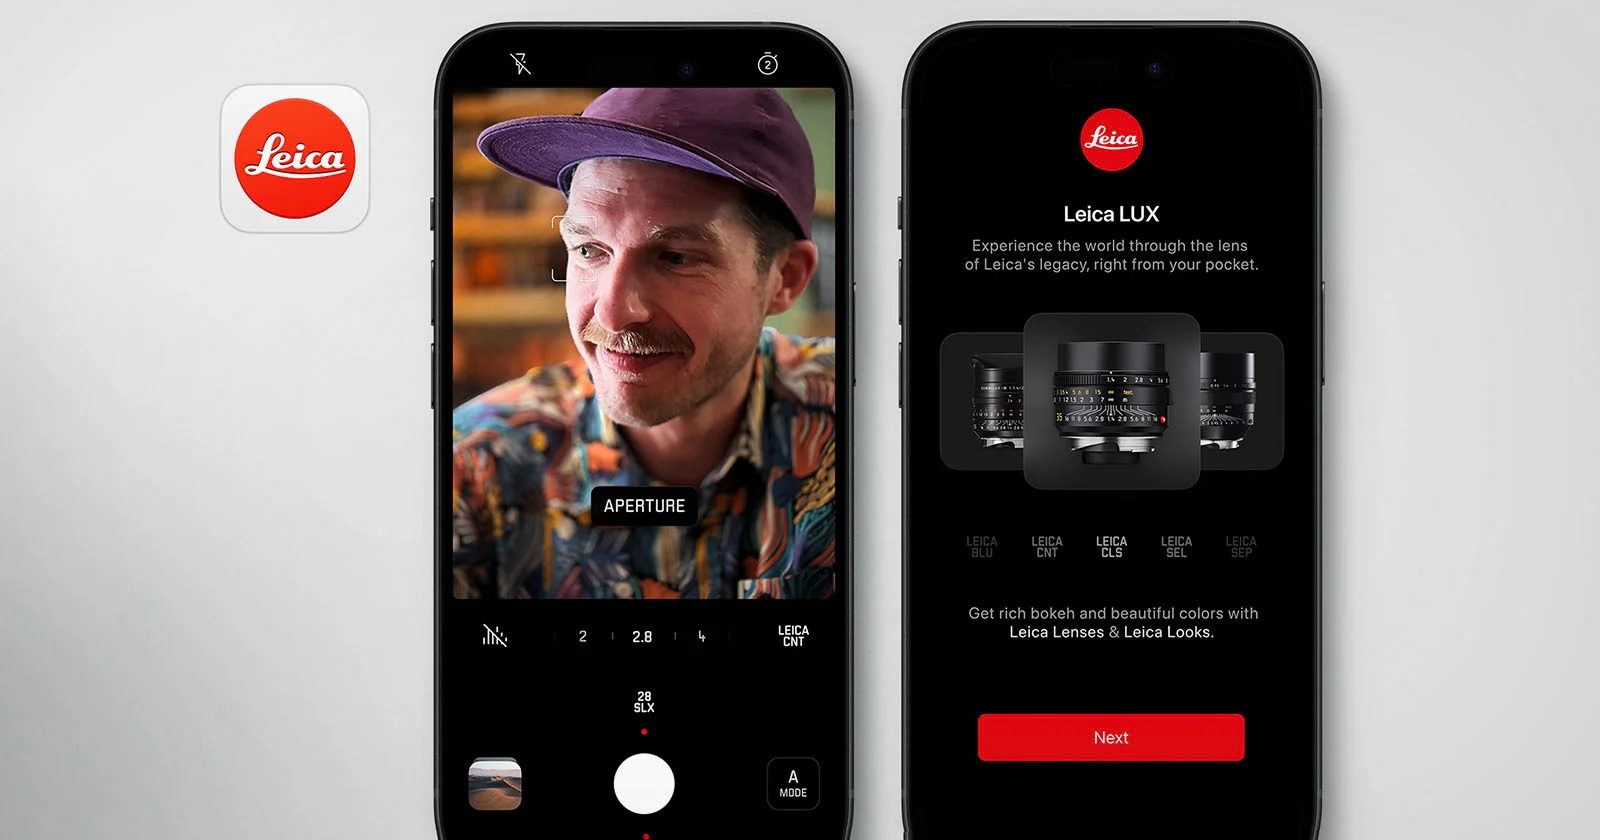 leica lux app featured